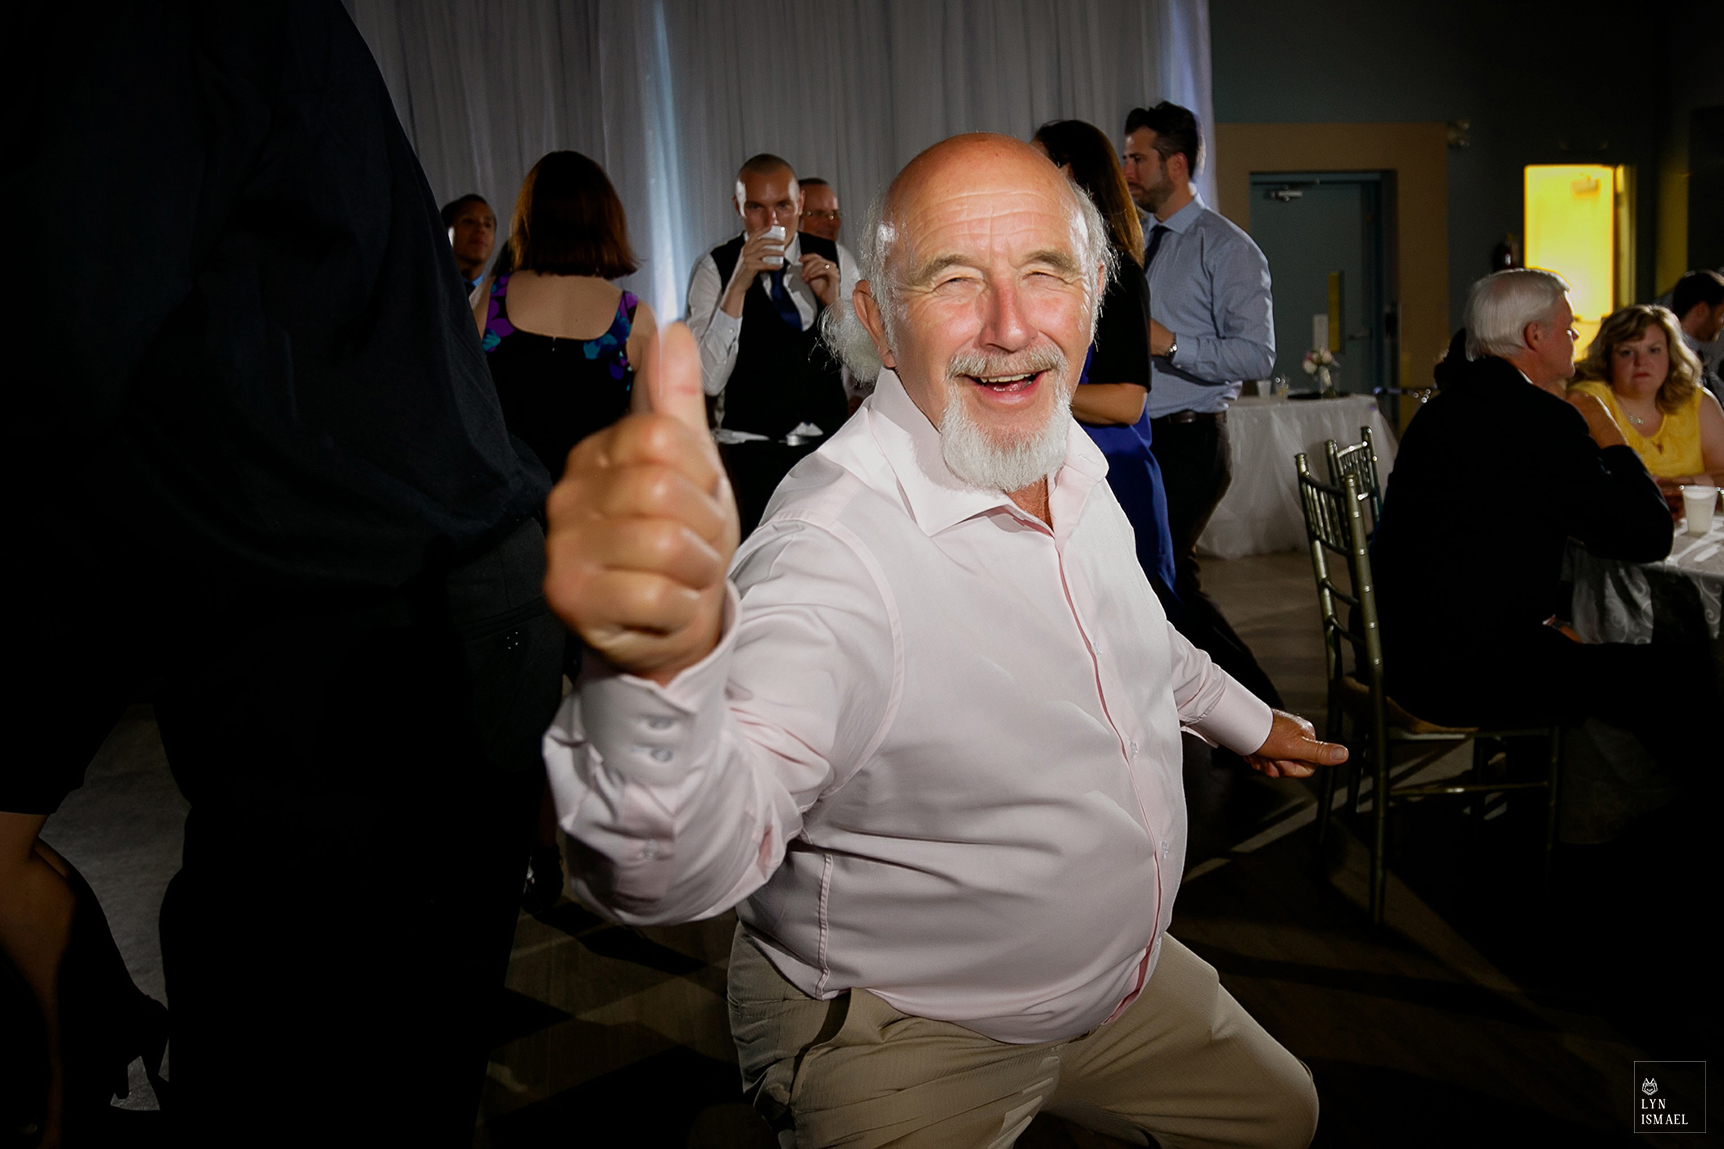 A man with a grey beard dances on the dance floor at a wedding reception in The Lakeview by Carmen's